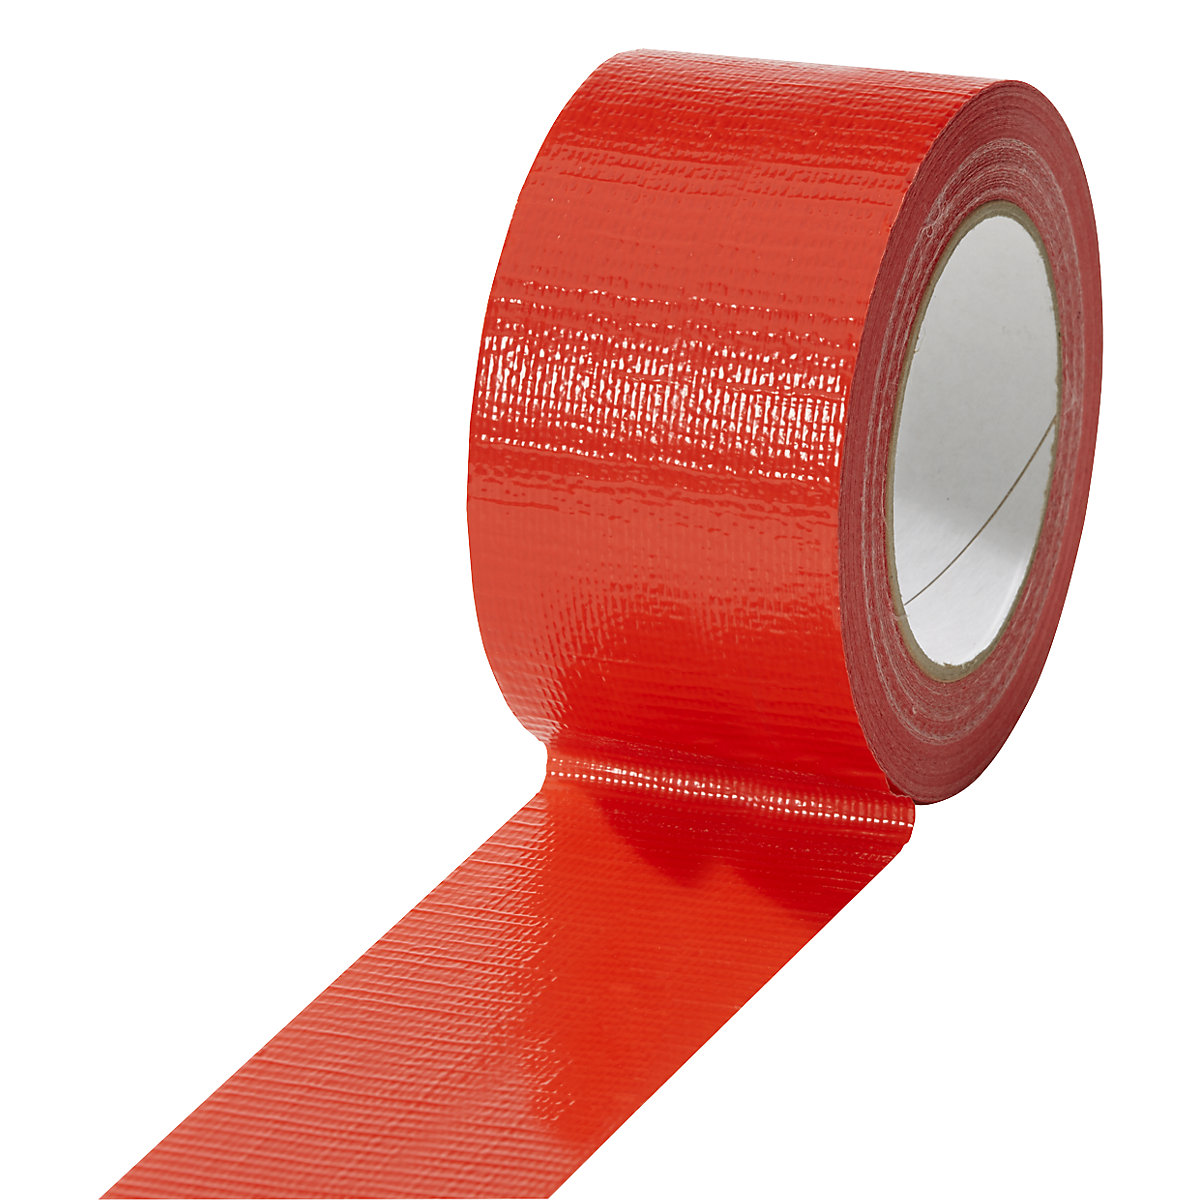 Fabric tape, in different colours, pack of 18 rolls, red, tape width 50 mm-7